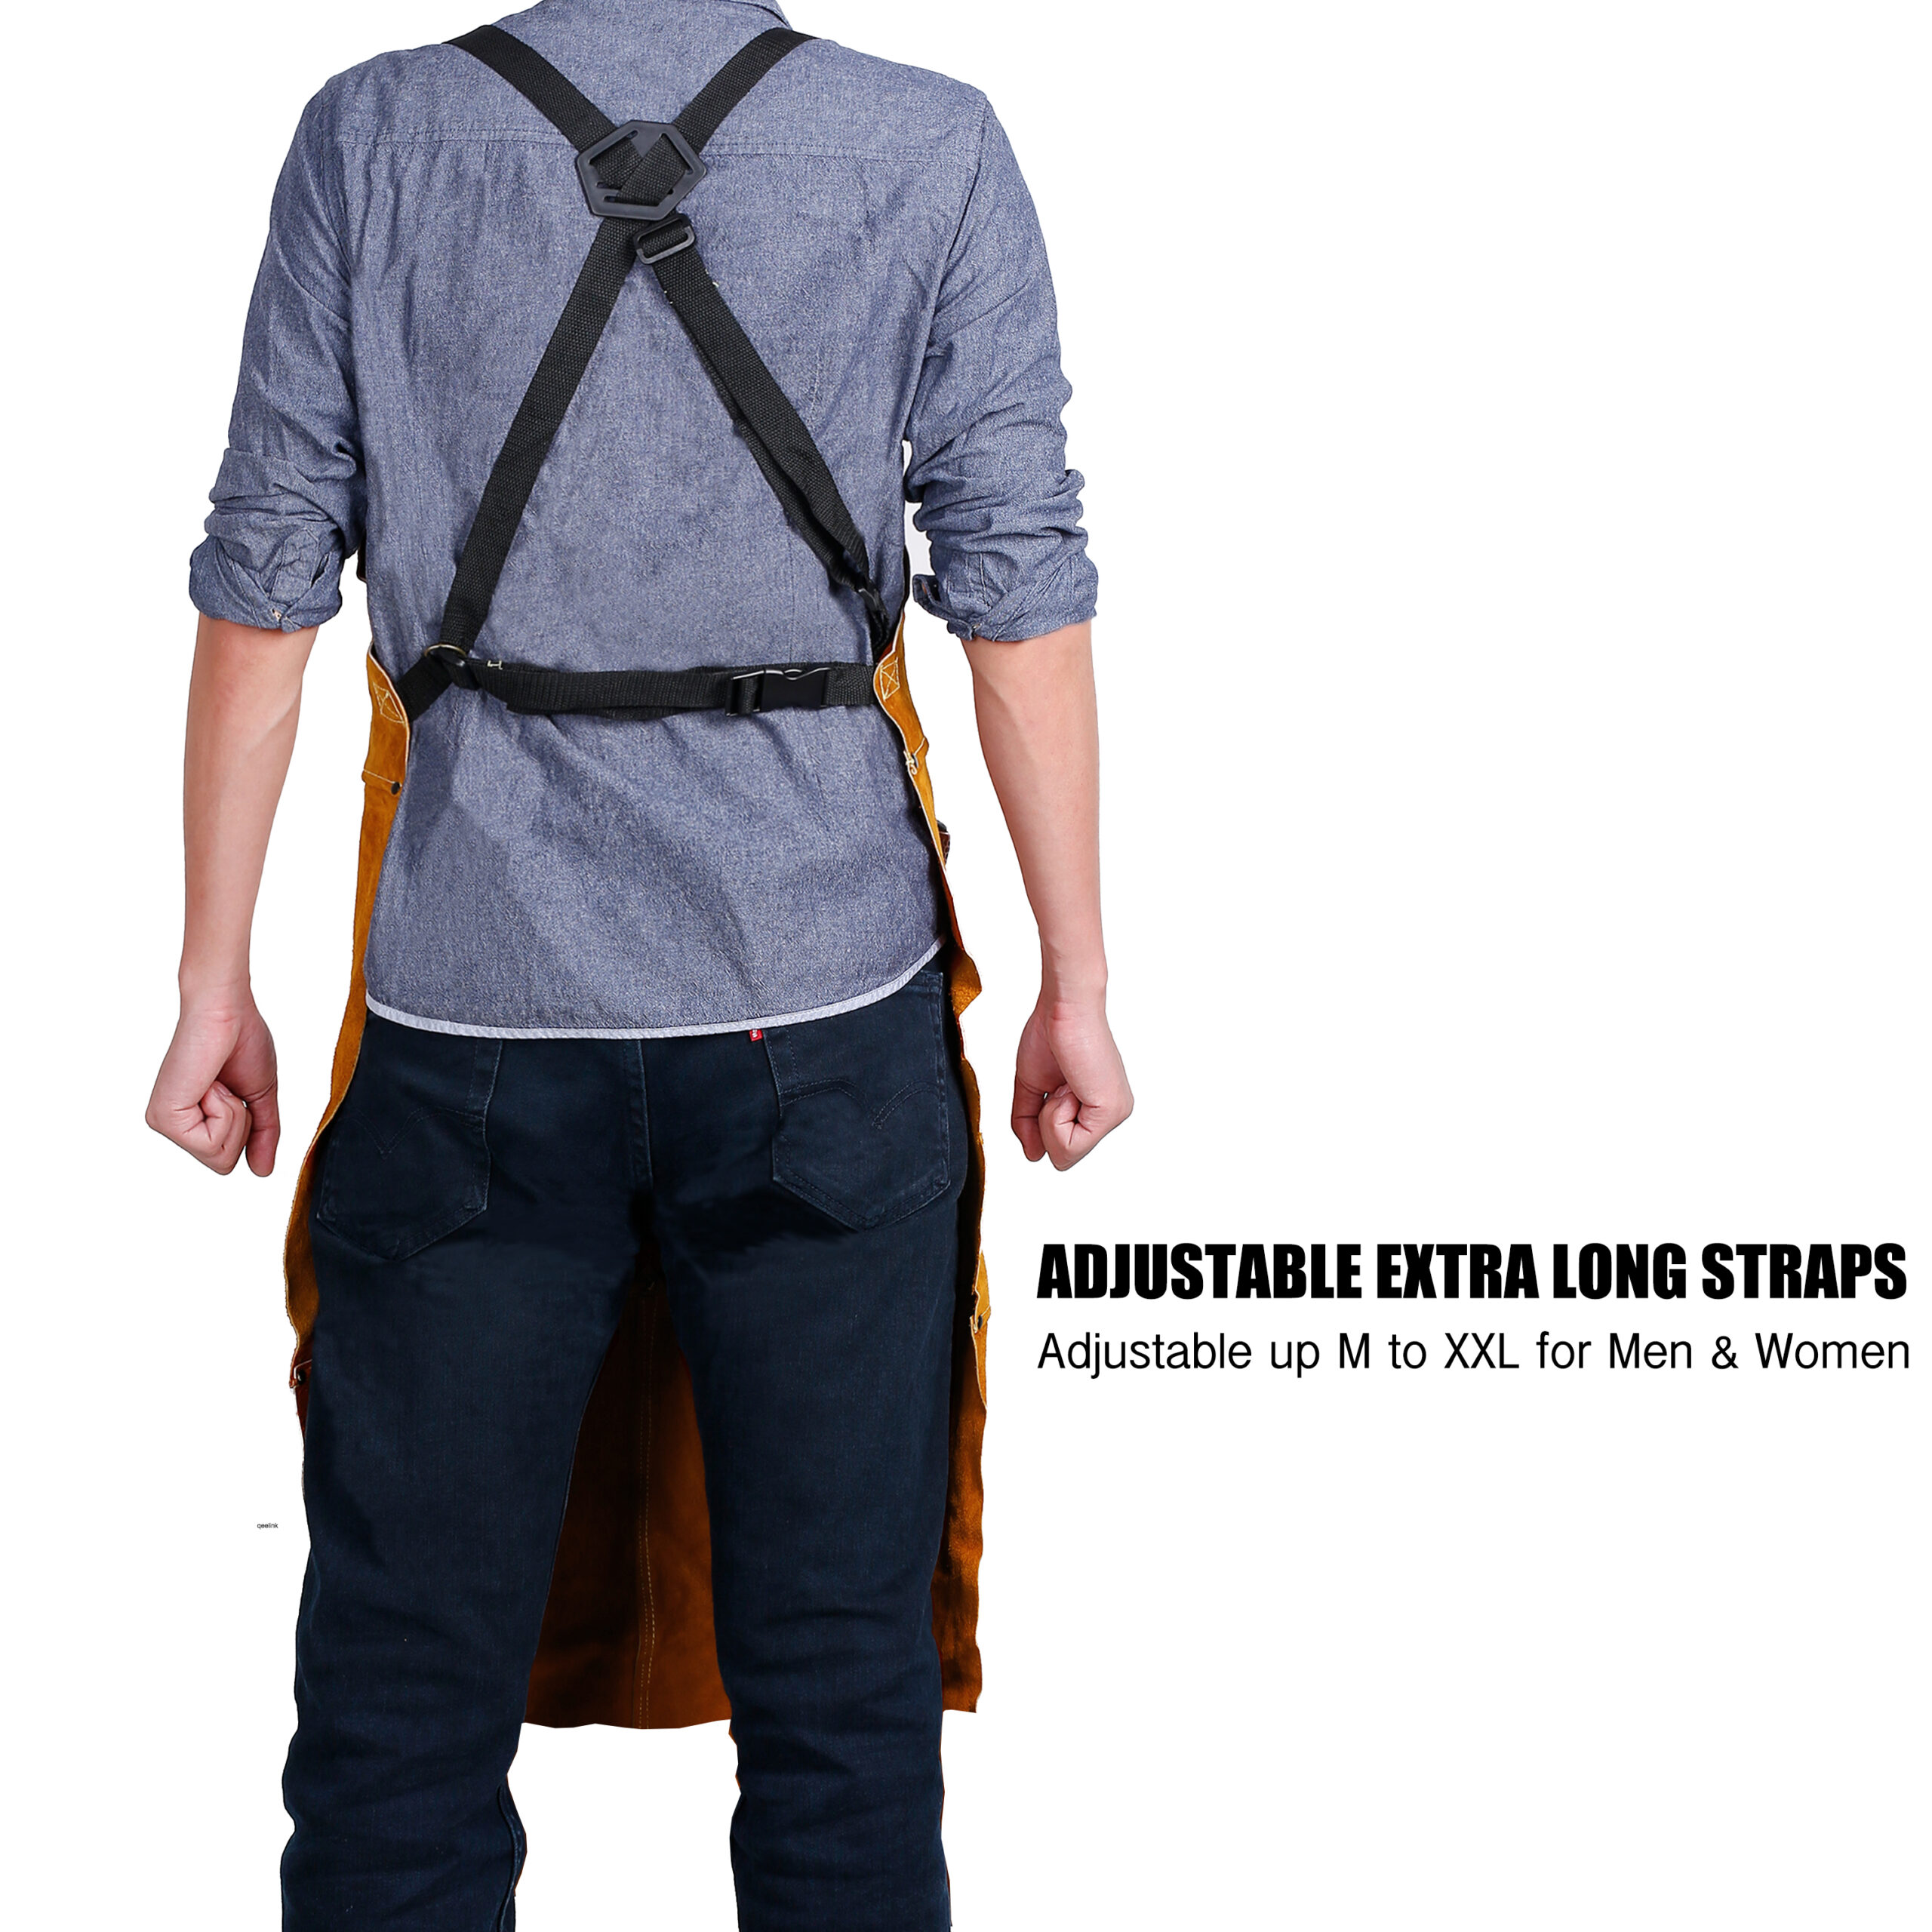 Leather Work Shop Apron with 6 Tool Pockets by QeeLink Heat & Flame Resistant 